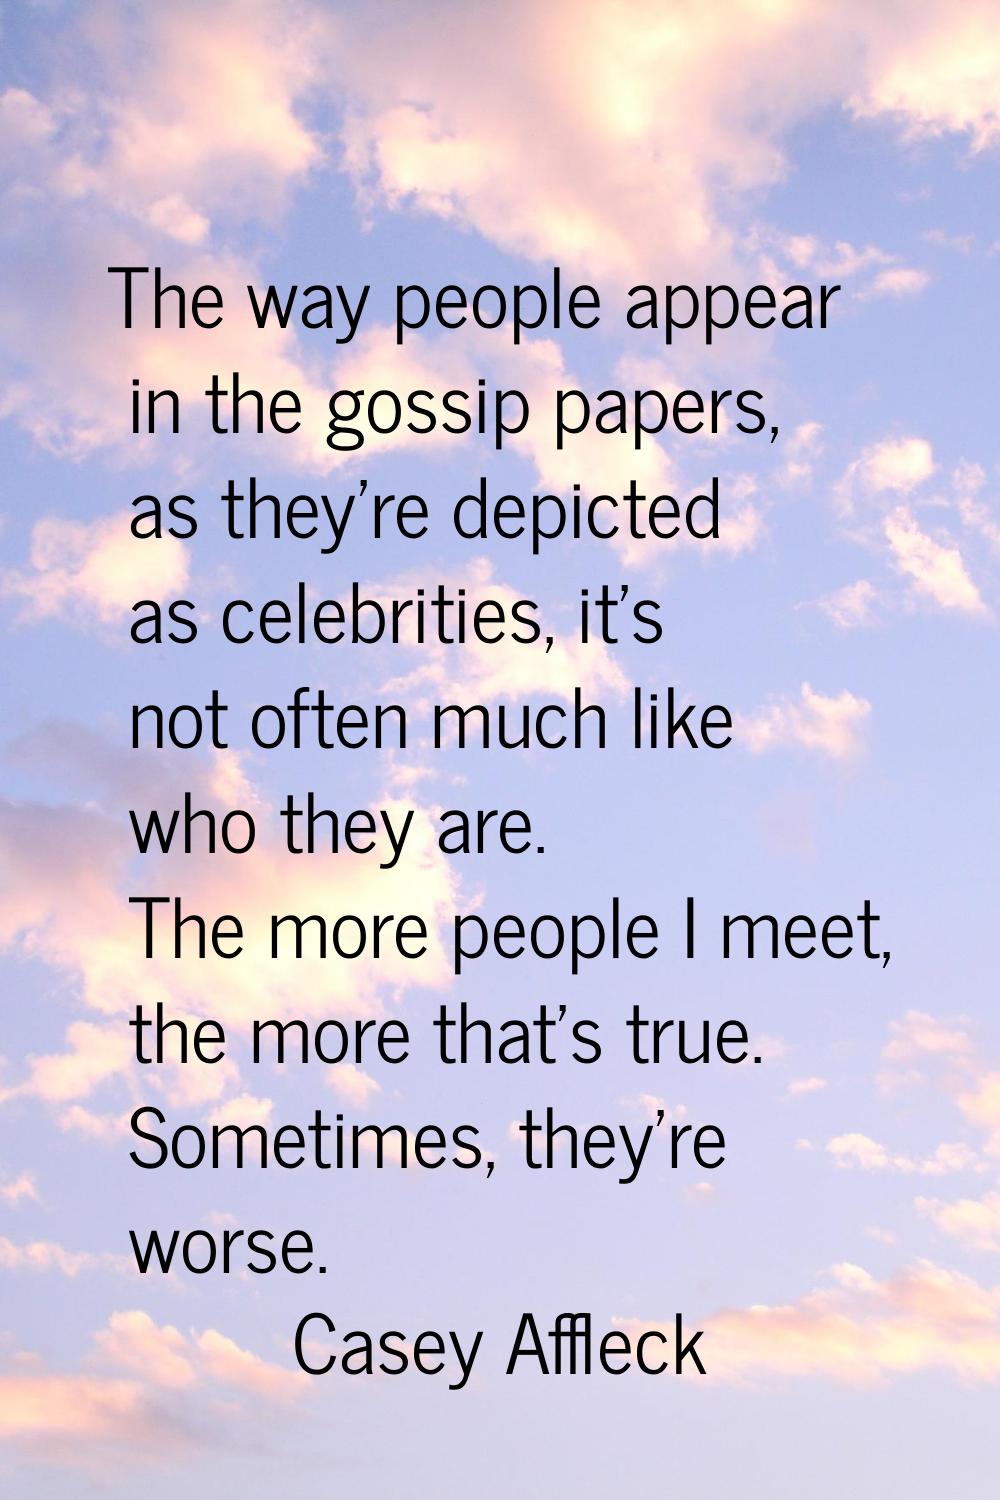 The way people appear in the gossip papers, as they're depicted as celebrities, it's not often much